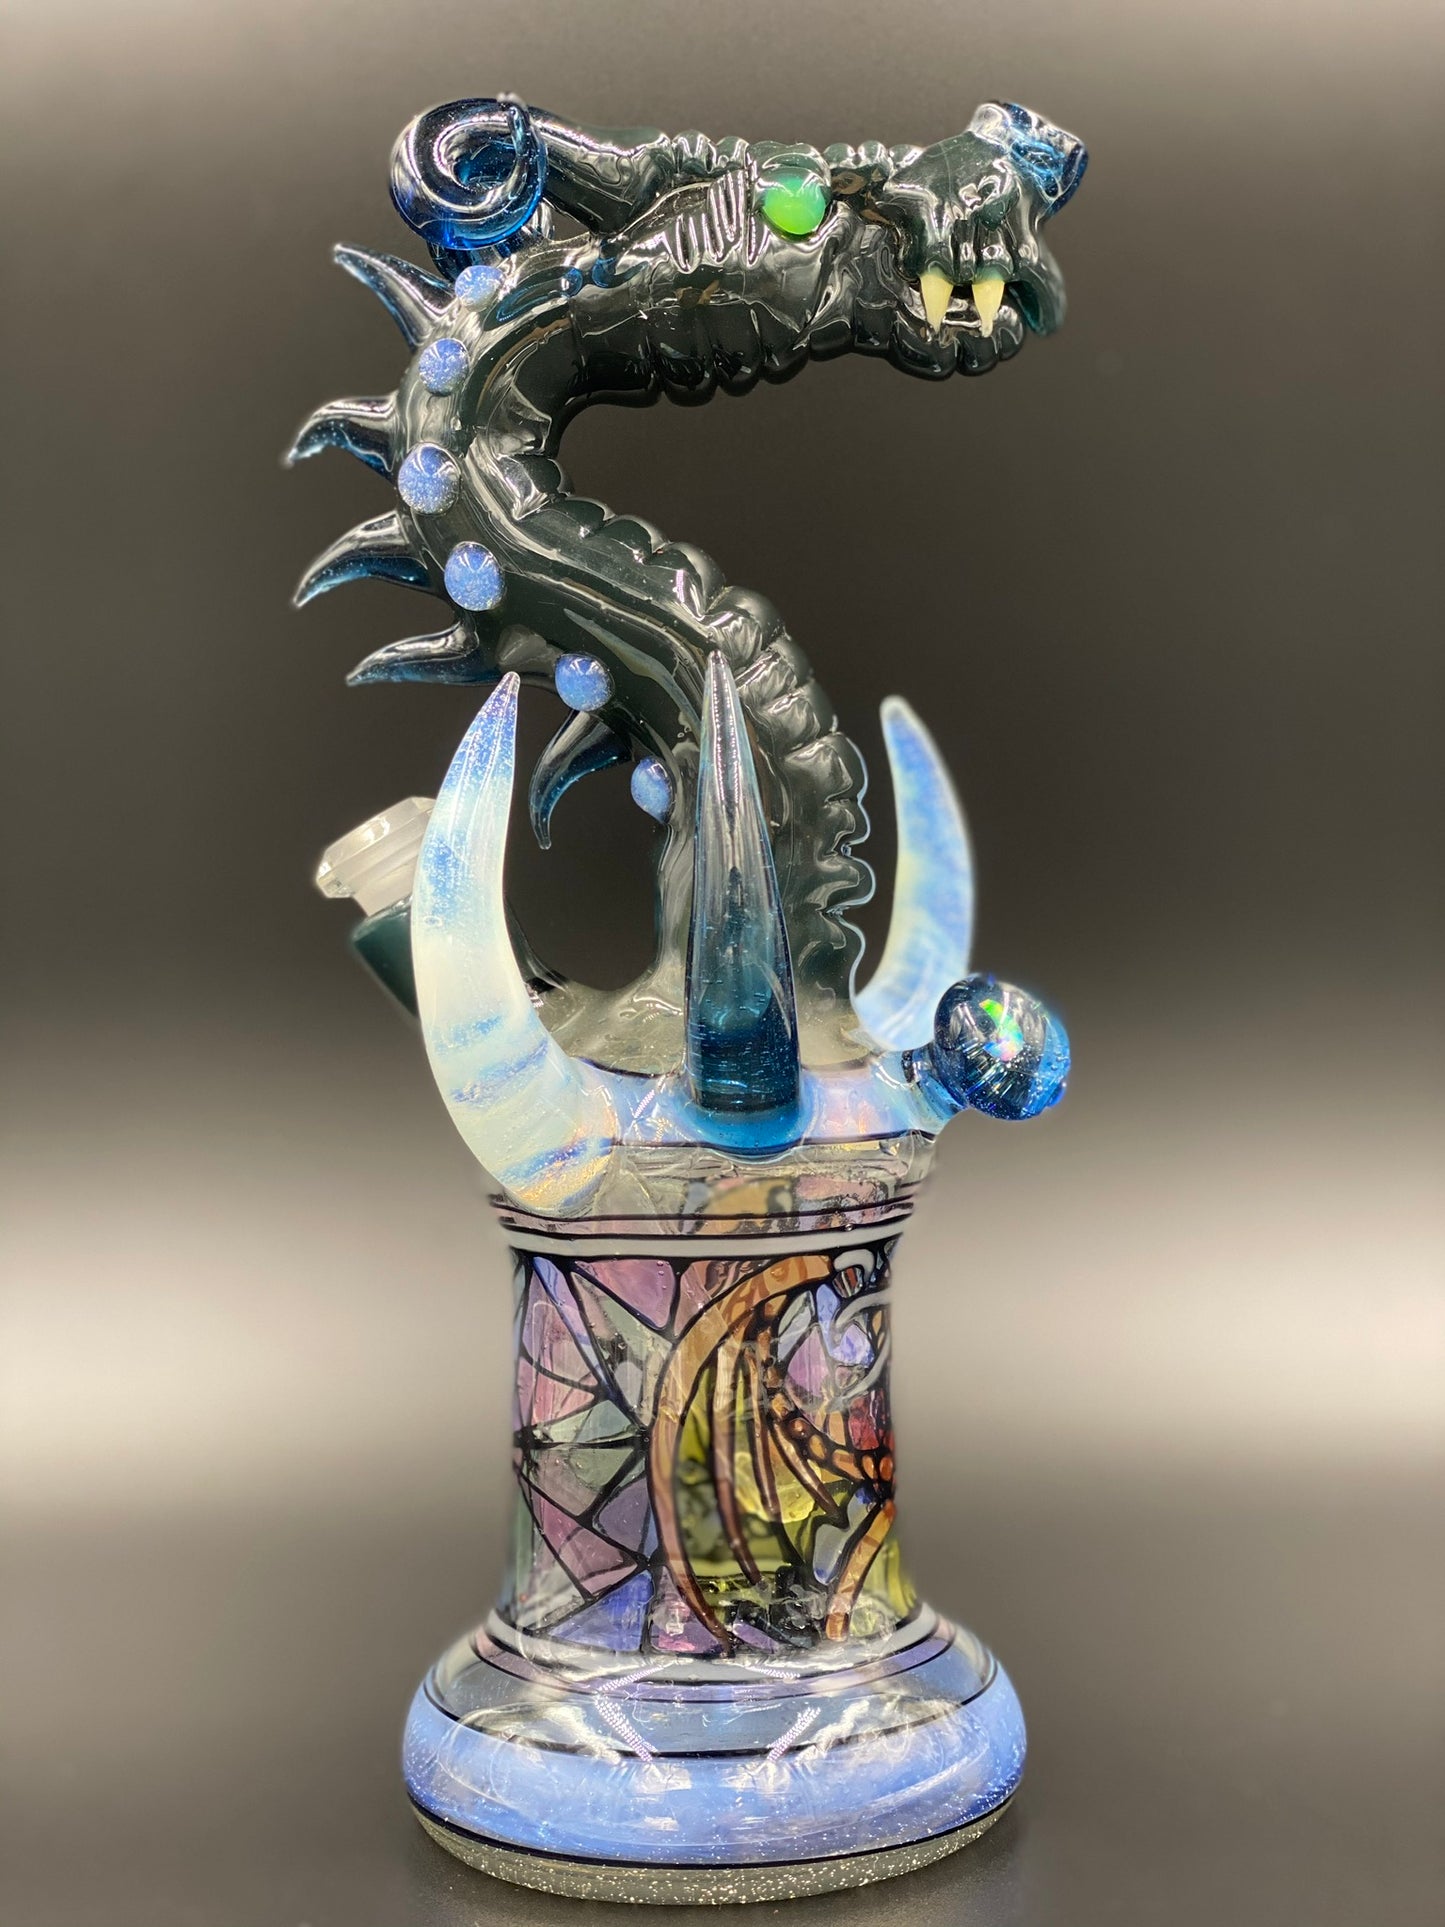 Dragon and Phoenix by Windstar and TonyKazy - The Glass Mule